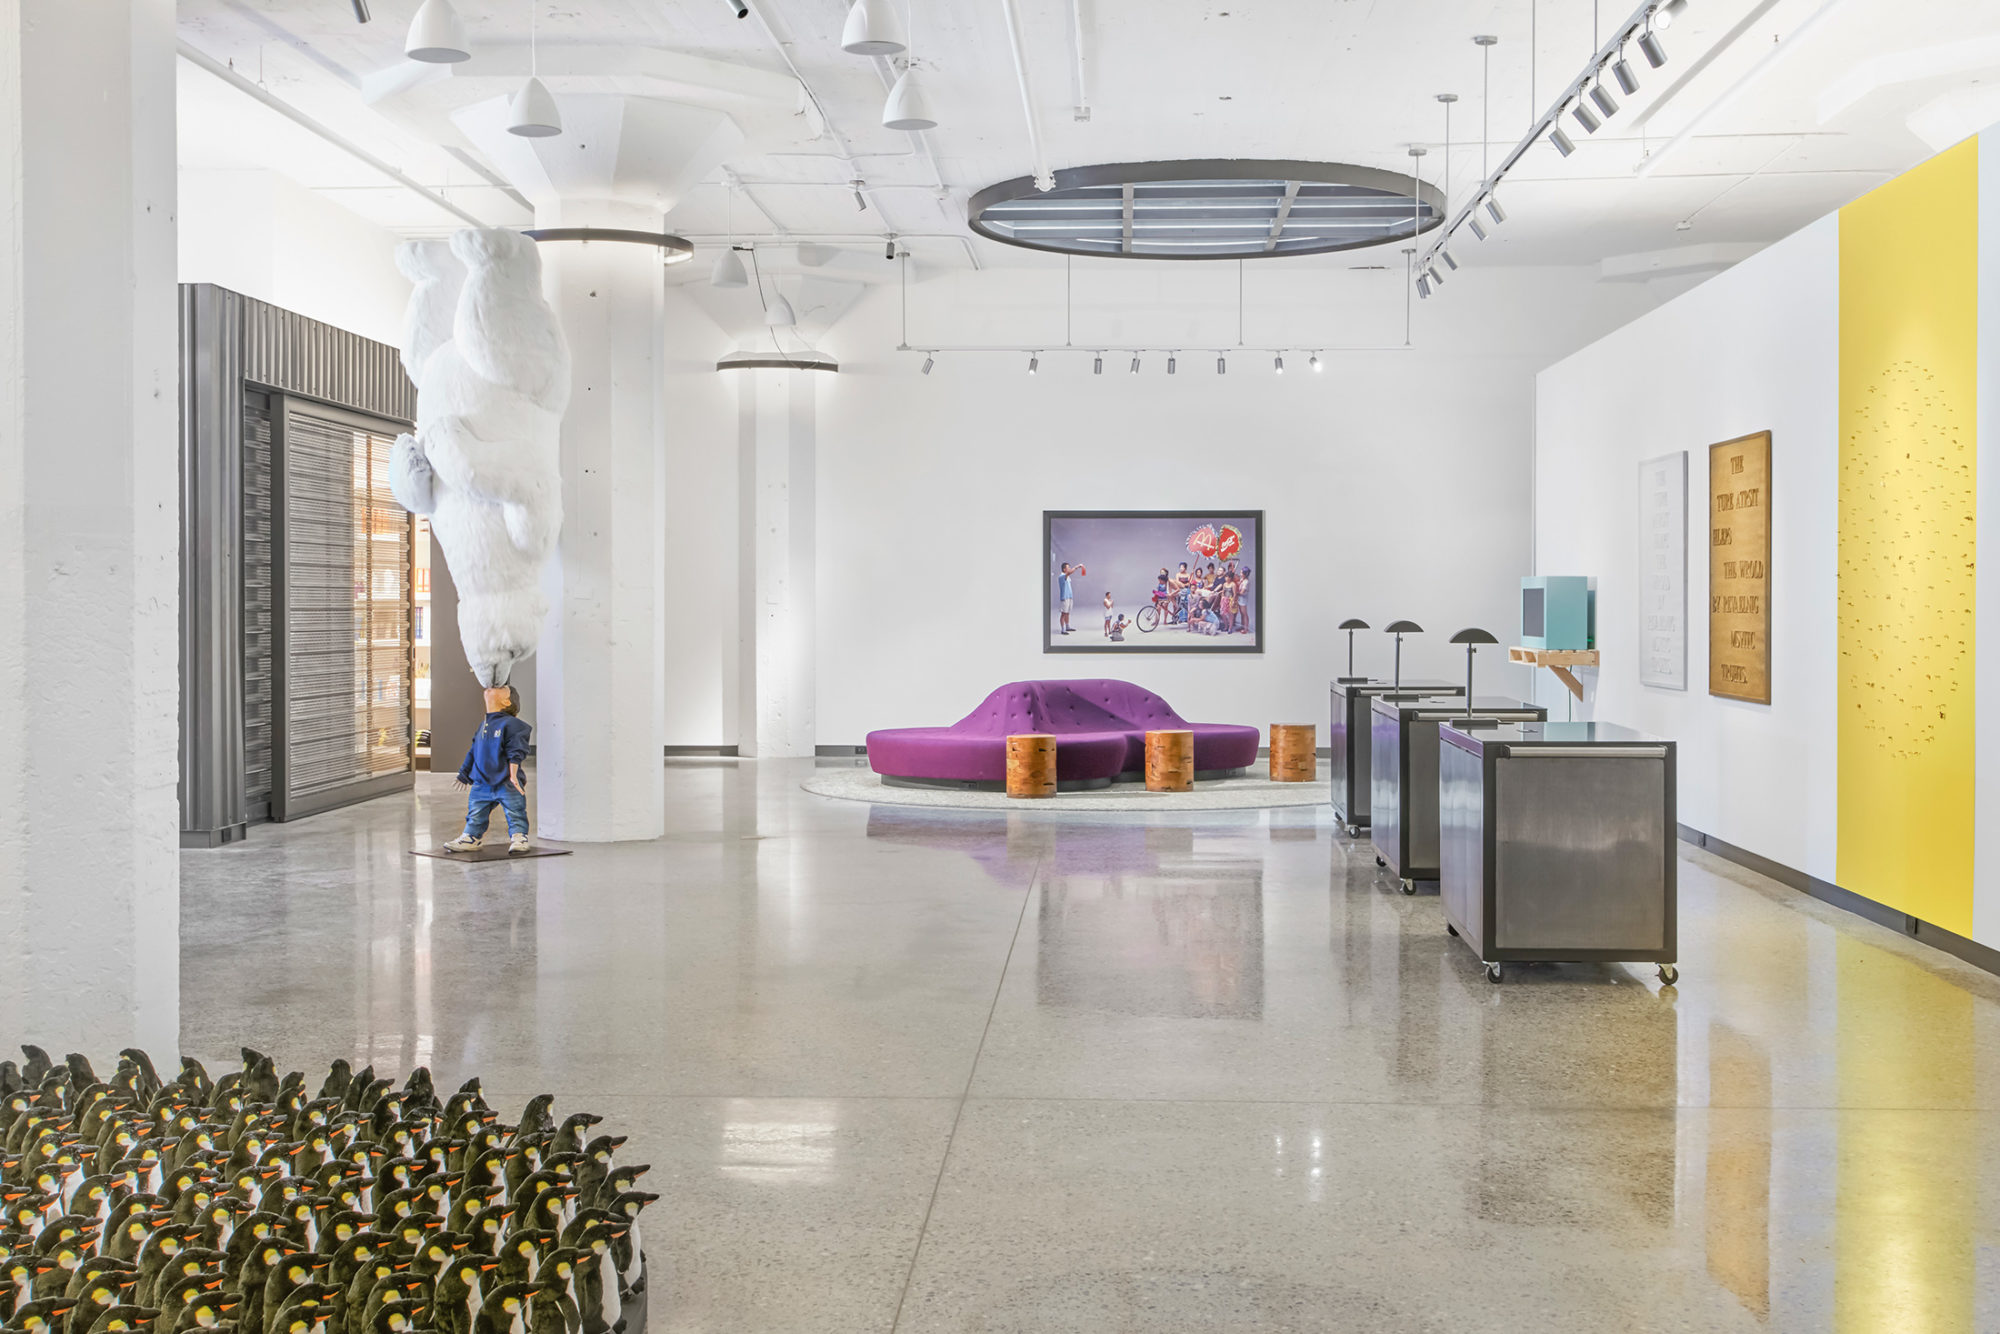 Nude Group Hotel - 21c Hotels Brings Contemporary Art to the Heartland â€“ SURFACE